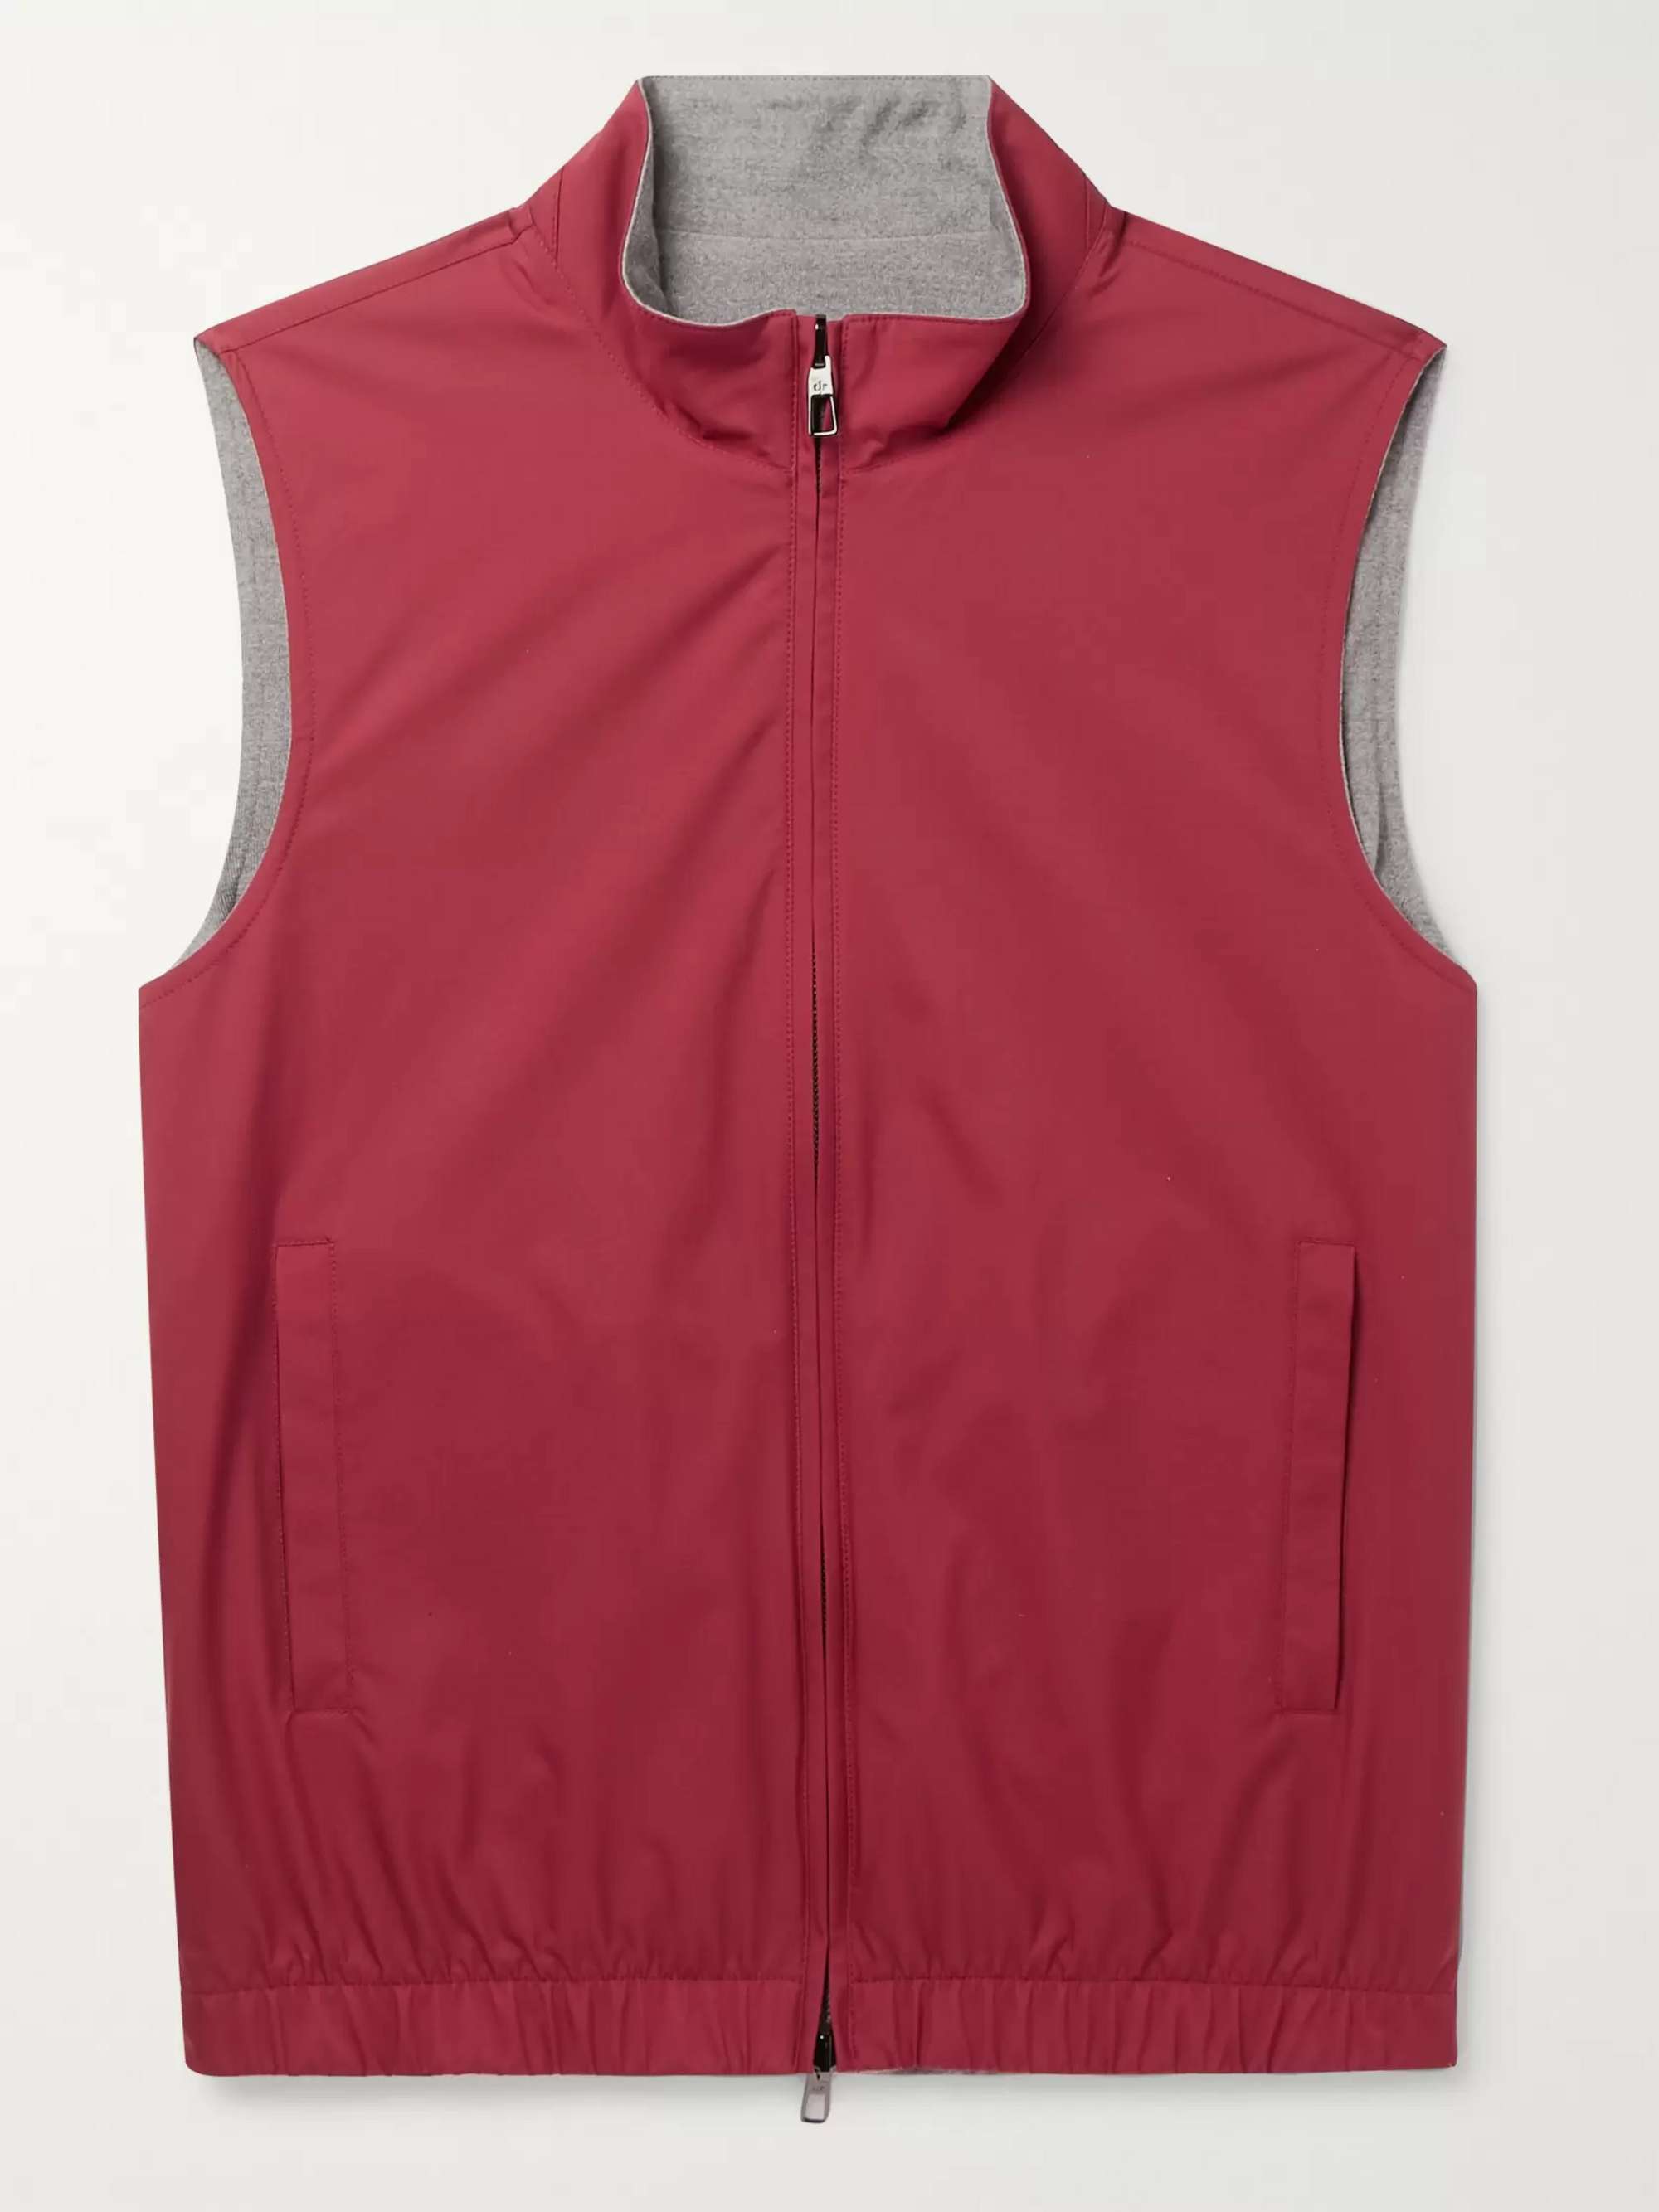 Slim-Fit Reversible Storm System Shell and Super Wish Virgin Wool Gilet